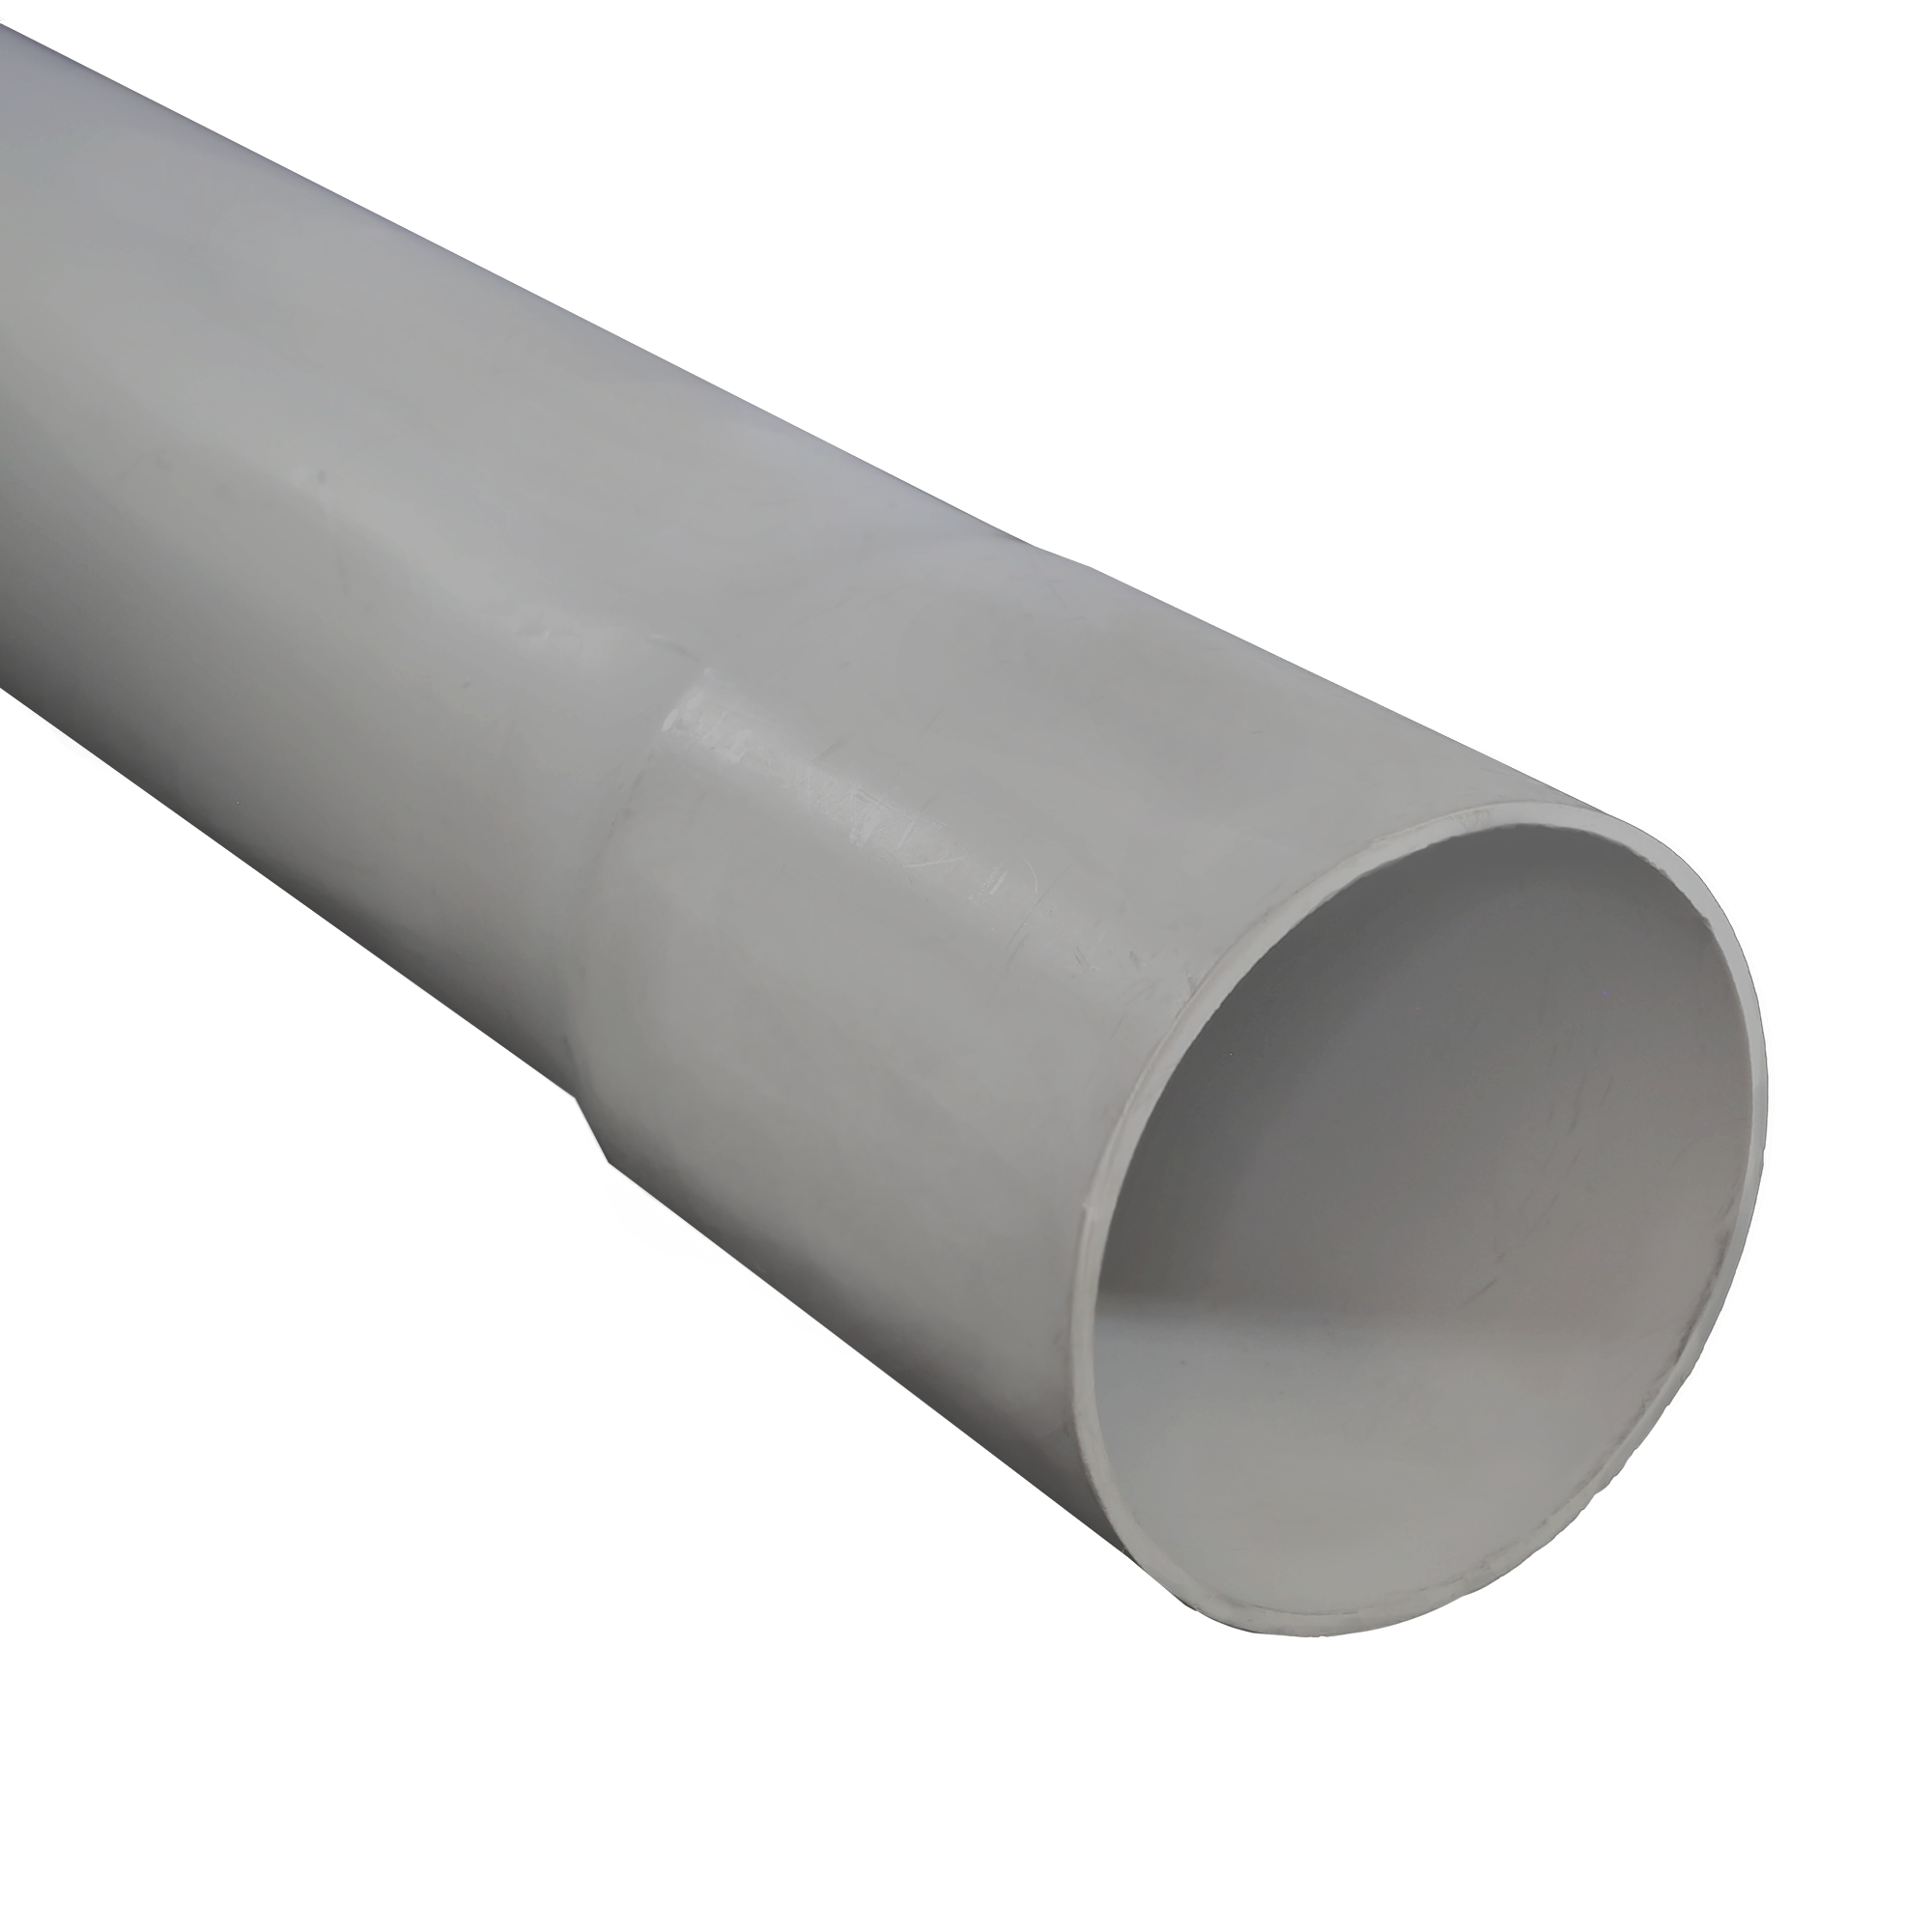 6 in. x 20 ft. EB-35 PVC Utility Duct